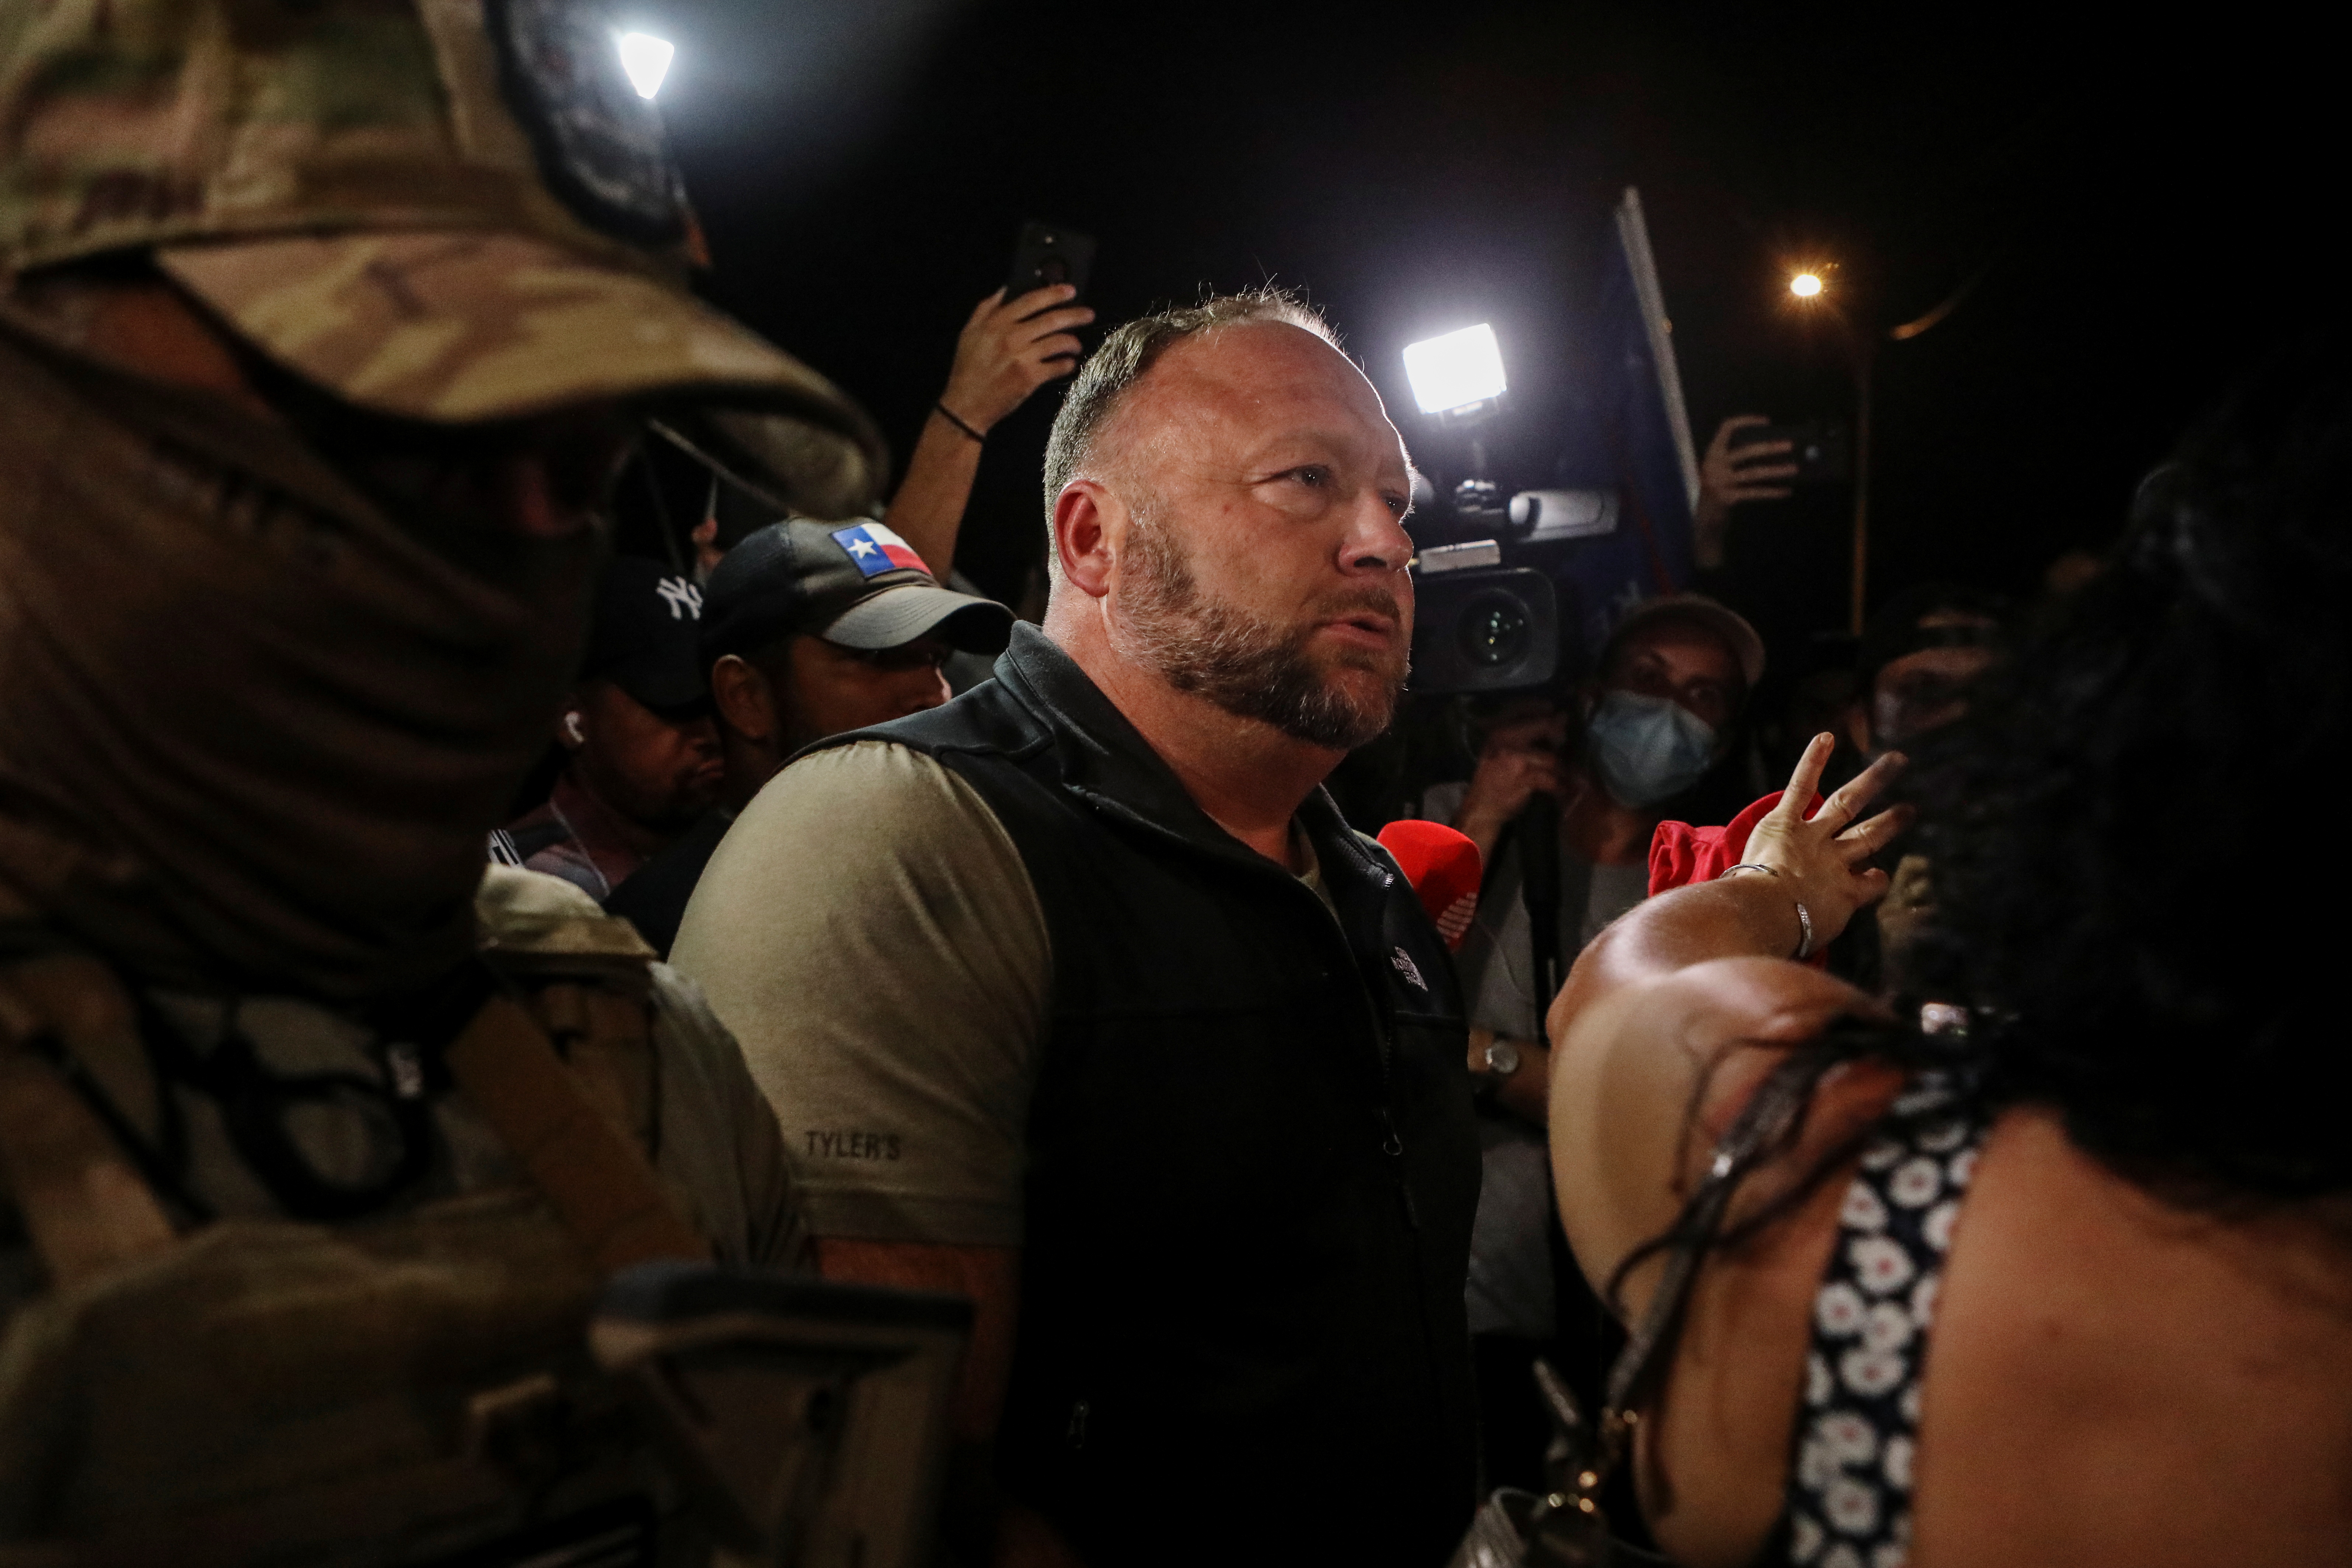 Alex Jones of Infowars looks on as supporters of U.S. President Donald Trump gather during a protest about the early results of the 2020 presidential election in Phoenix, Arizona, U.S., November 5, 2020. REUTERS/Jim Urquhart